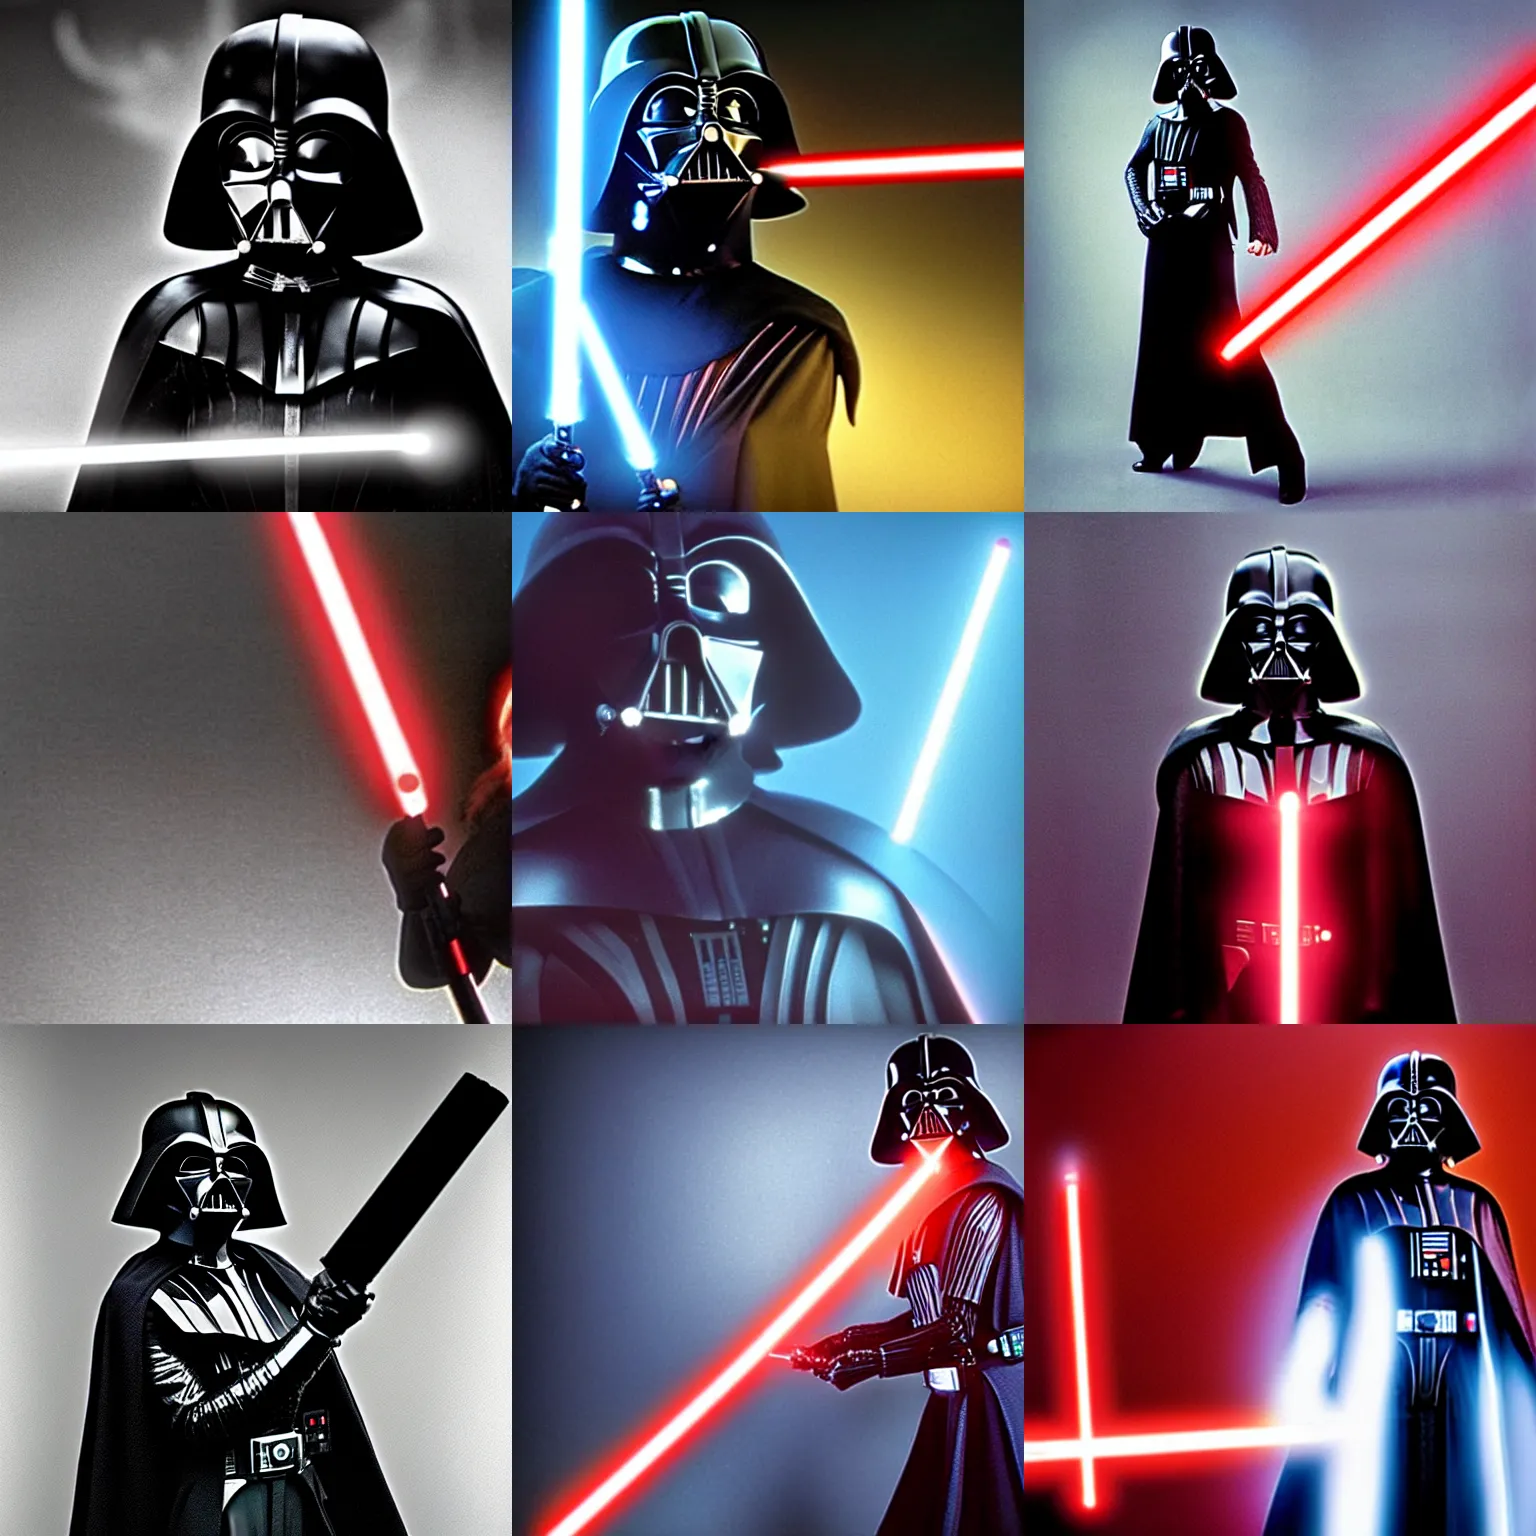 Prompt: A female Darth Vader poses with lightsabers, screen test photograph